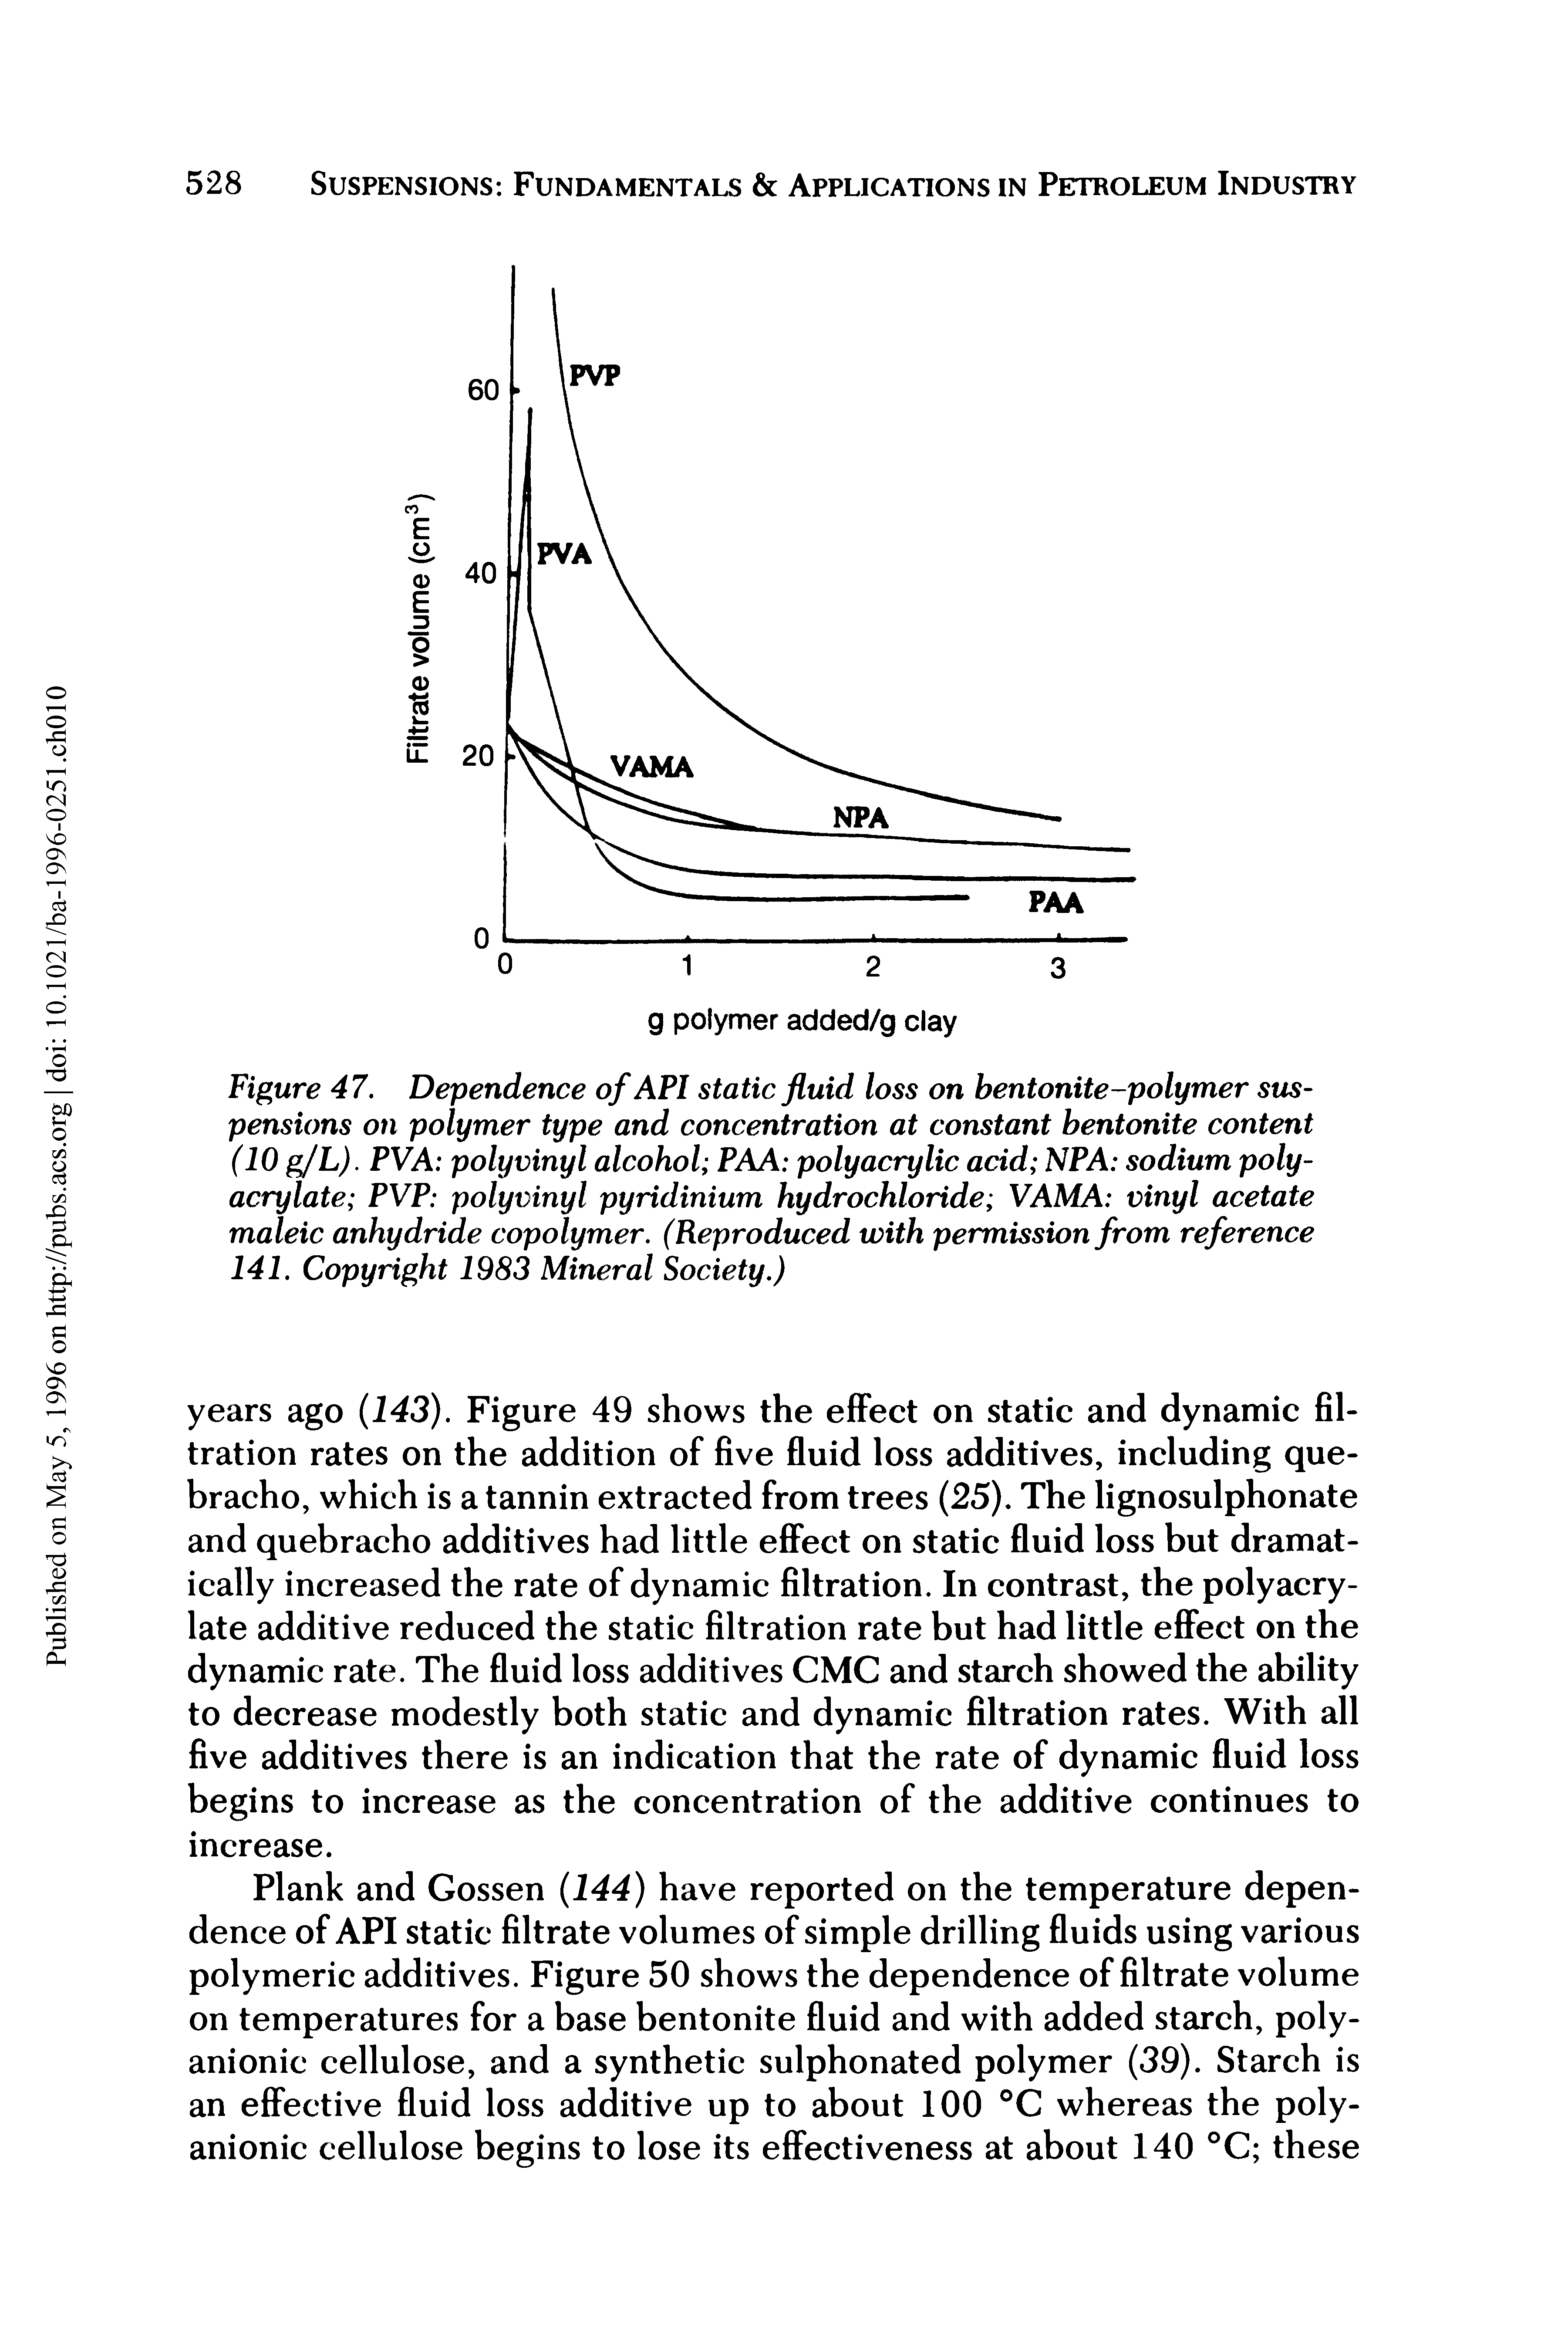 Figure 47. Dependence of API static fluid loss on bentonite-polymer suspensions on polymer type and concentration at constant bentonite content (10 g/L). PVA polyvinyl alcohol PAA polyacrylic acid NPA sodium polyacrylate PVP polyvinyl pyridinium hydrochloride VAMA vinyl acetate maleic anhydride copolymer. (Reproduced with permission from reference 141. Copyright 1983 Mineral Society.)...